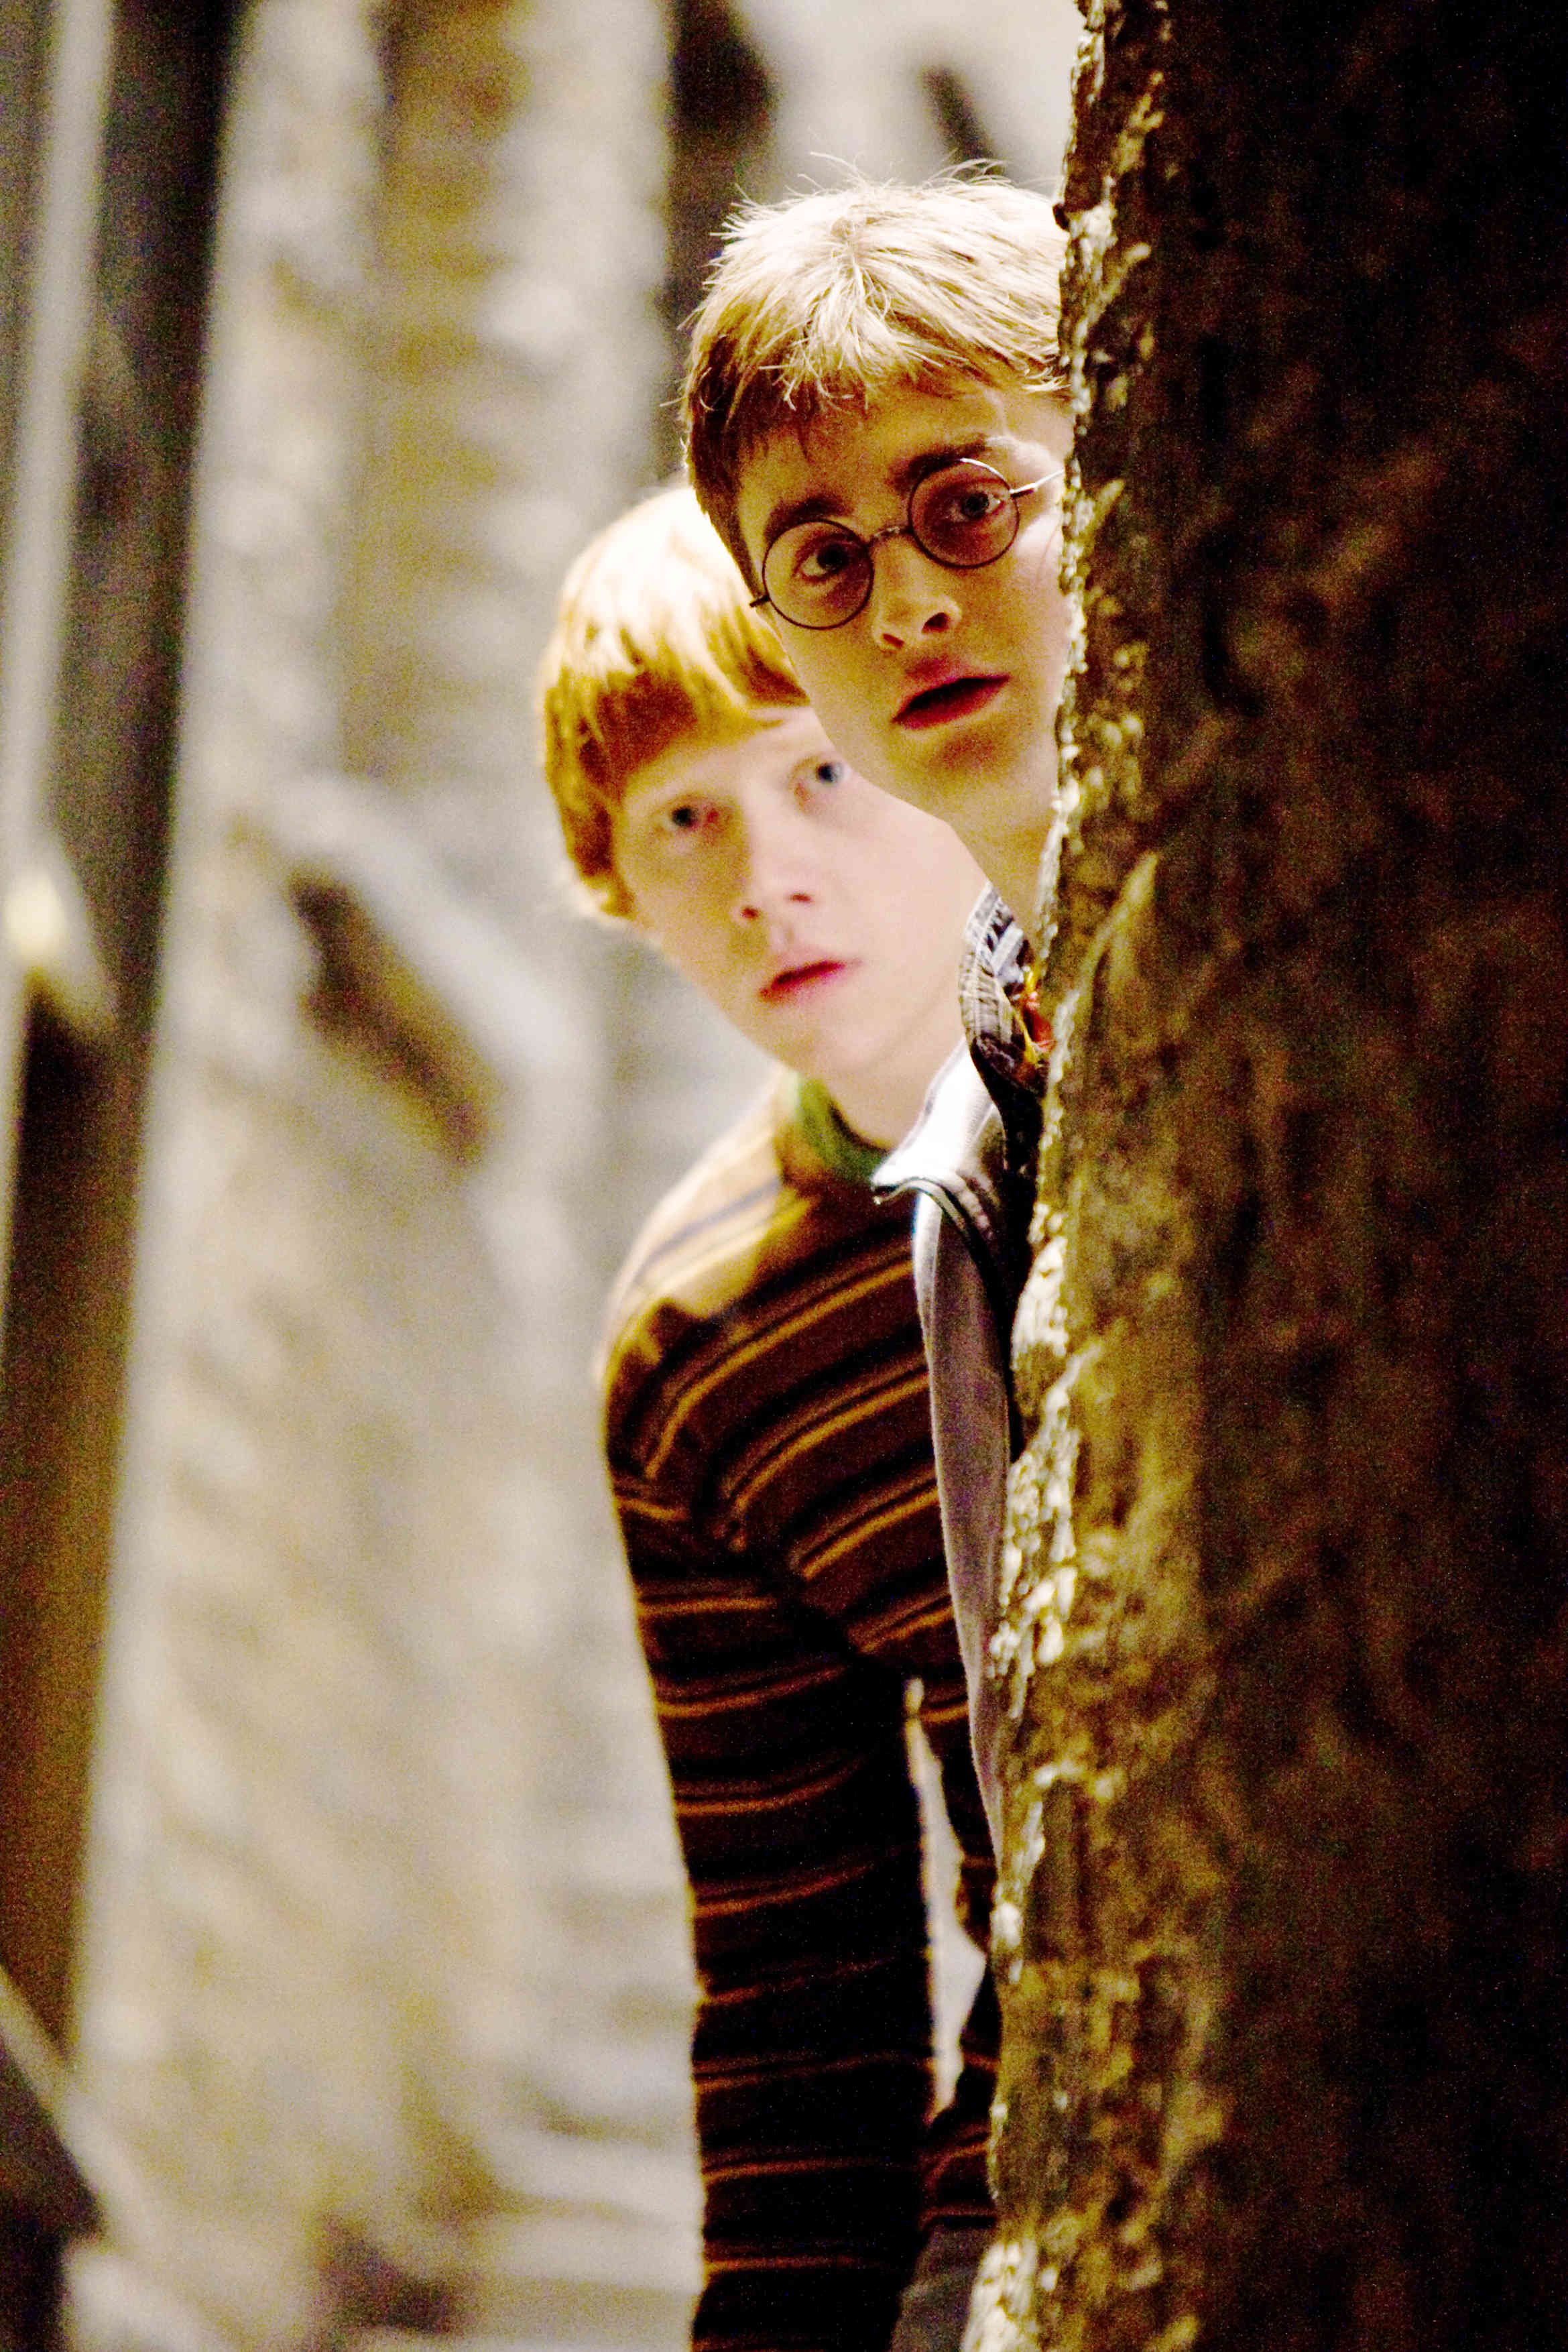 Rupert Grint stars as Ron Weasley and Daniel Radcliffe stars as Harry Potter in Warner Bros Pictures' Harry Potter and the Half-Blood Prince (2009)